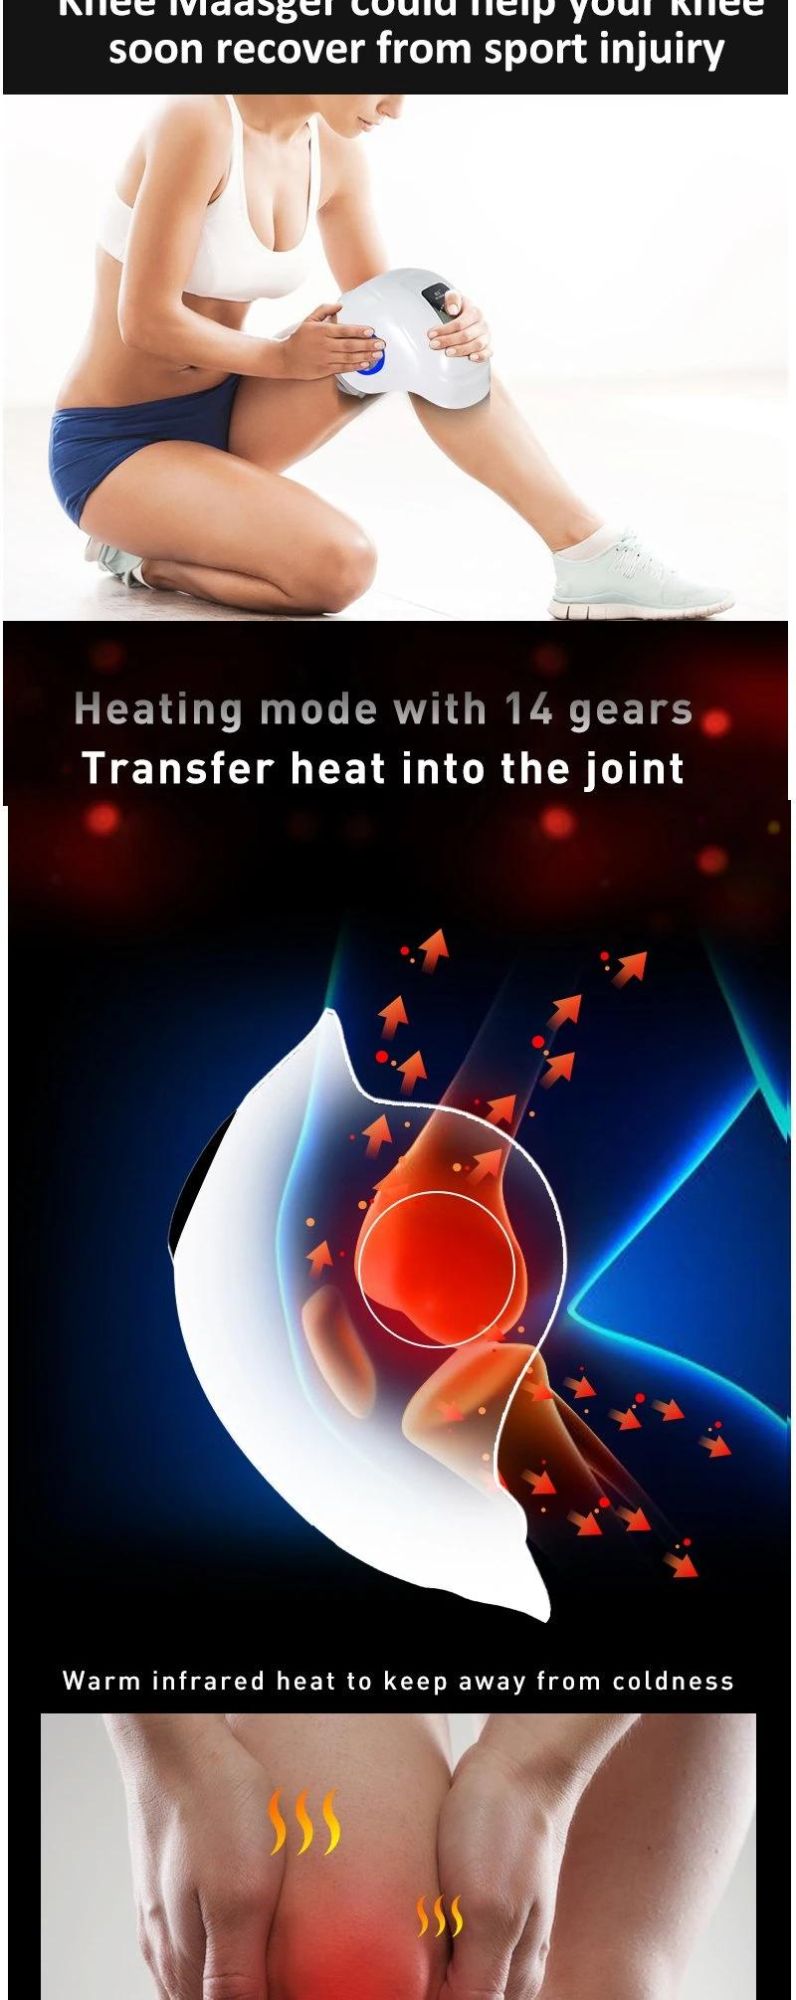 Hezheng Vibration Air Pressure Knee Health Care Pain Relief Electric Heating Knee Joint Massager for Pain Relief